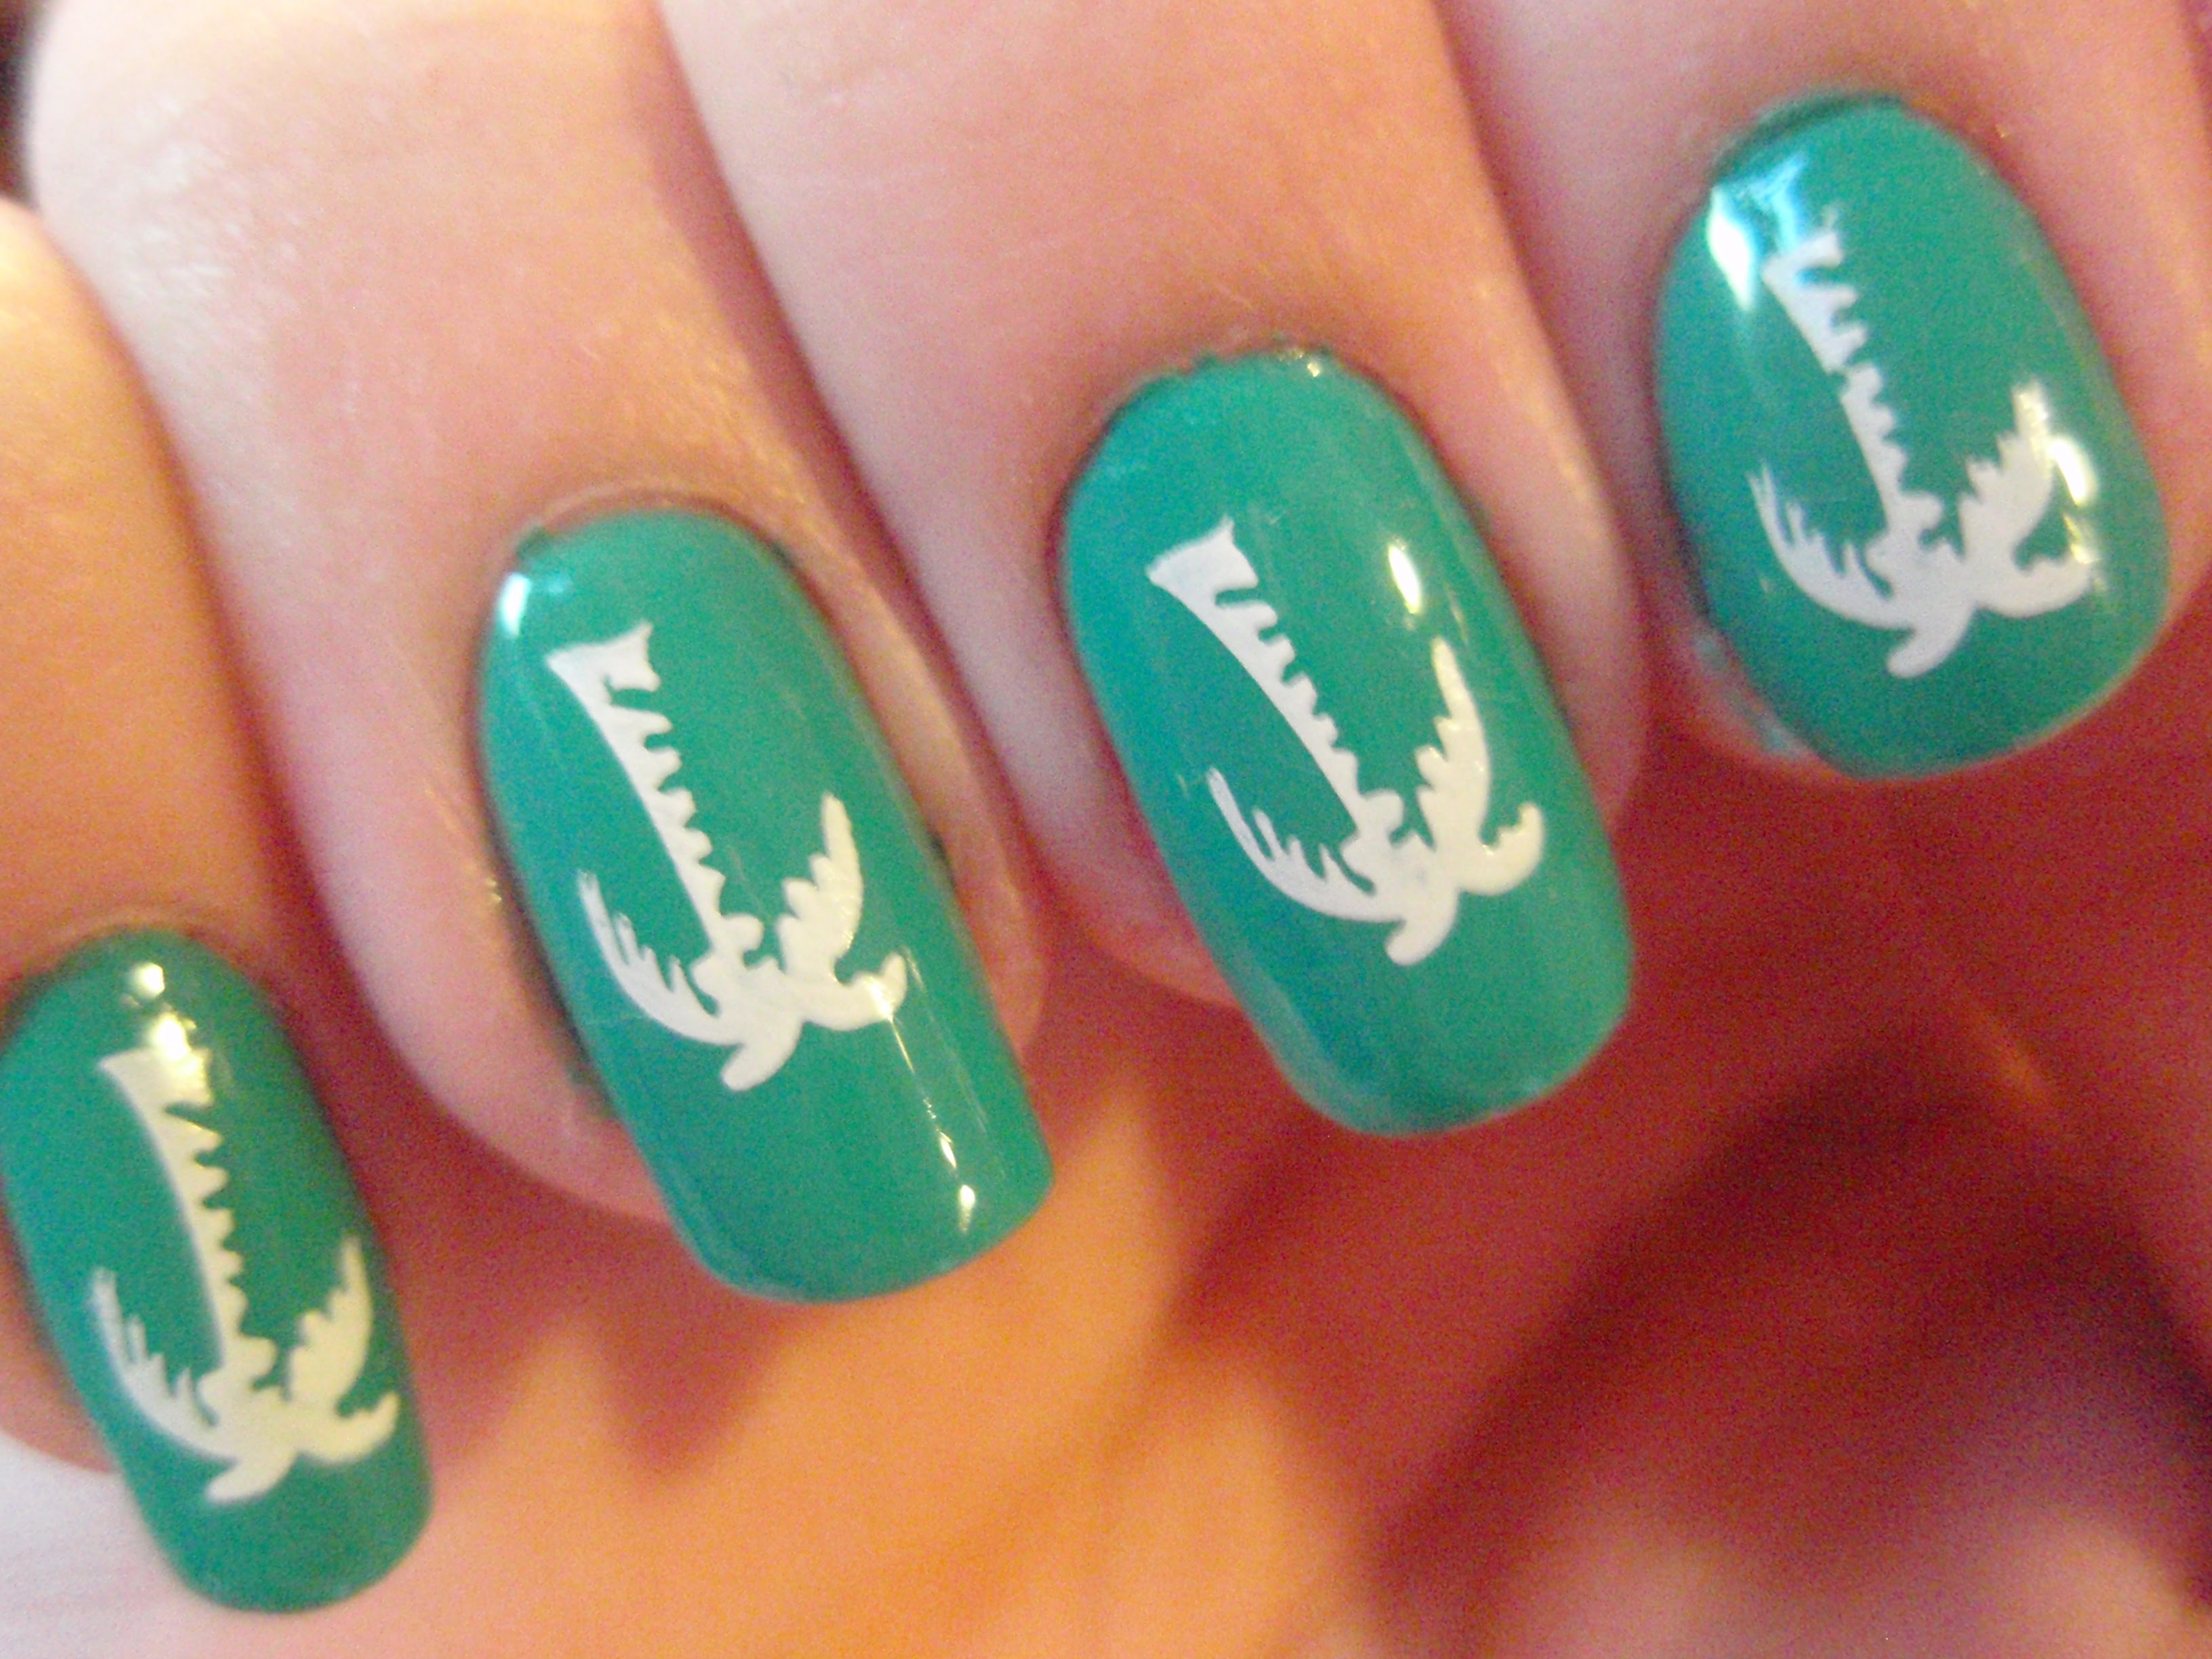 3. China Glaze Nail Lacquer in "Palm Tree Paradise" - wide 3